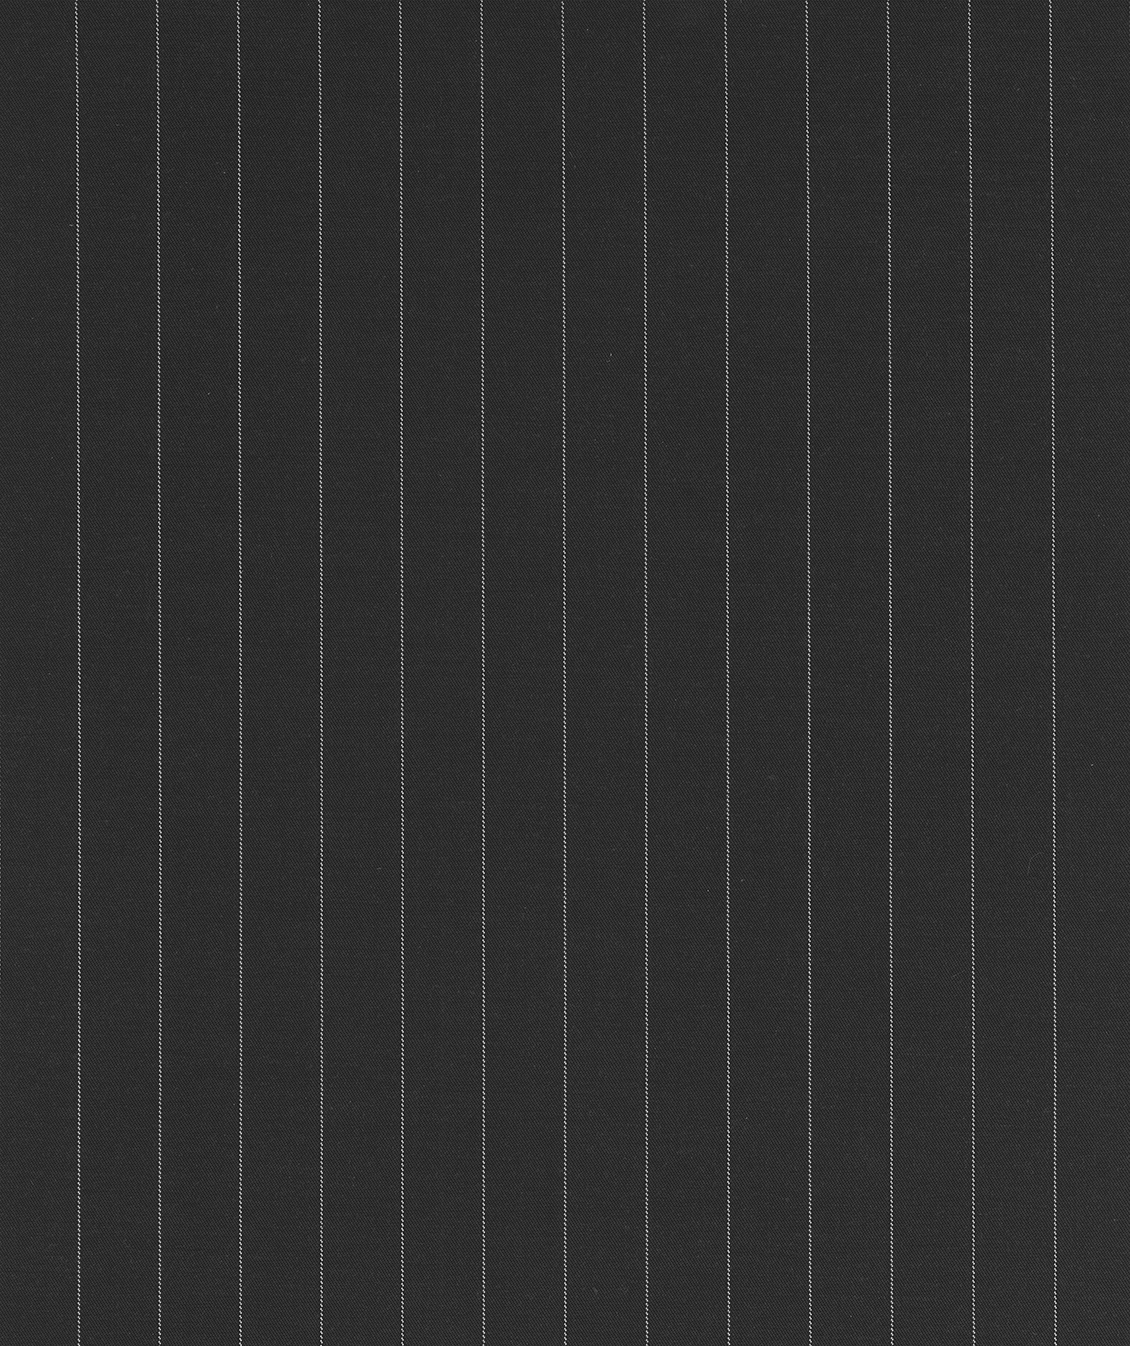 Pinstripe fabric wallpaper, white stripes on a dark gray background, fabric effect